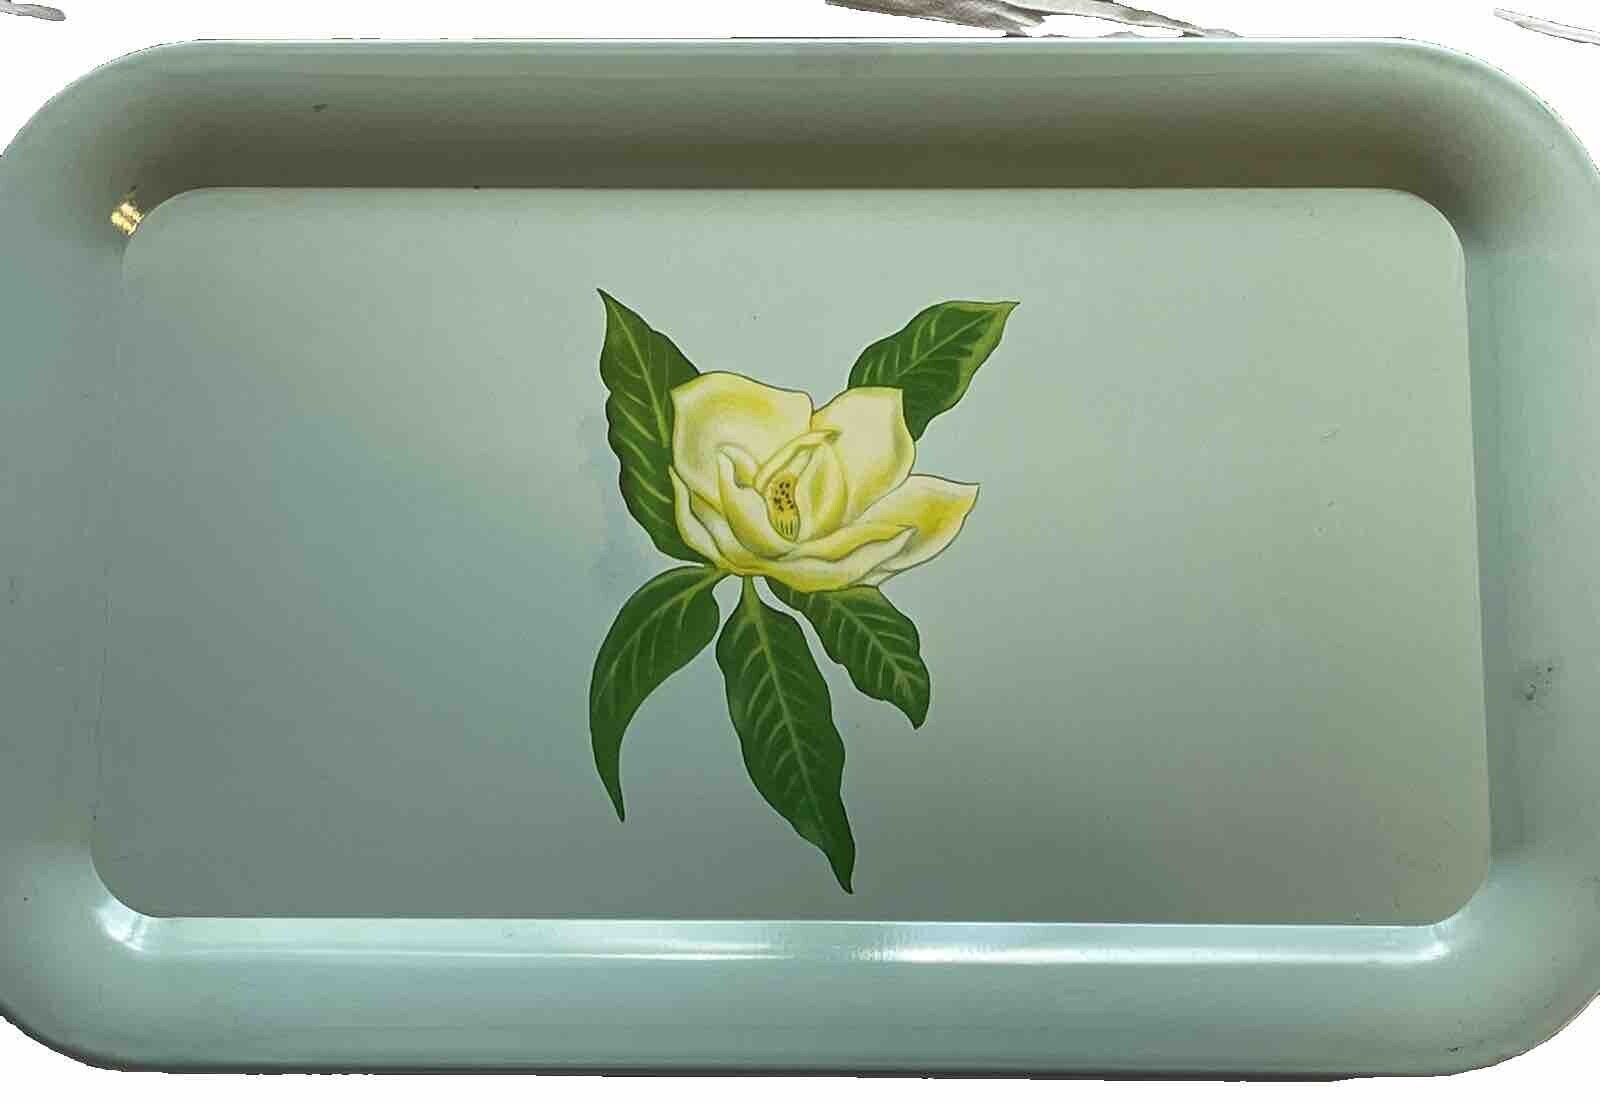 MID-CENTURY MODERN TURQUOISE RECTANGLE WITH MAGNOLIA FLOWER METAL TRAY